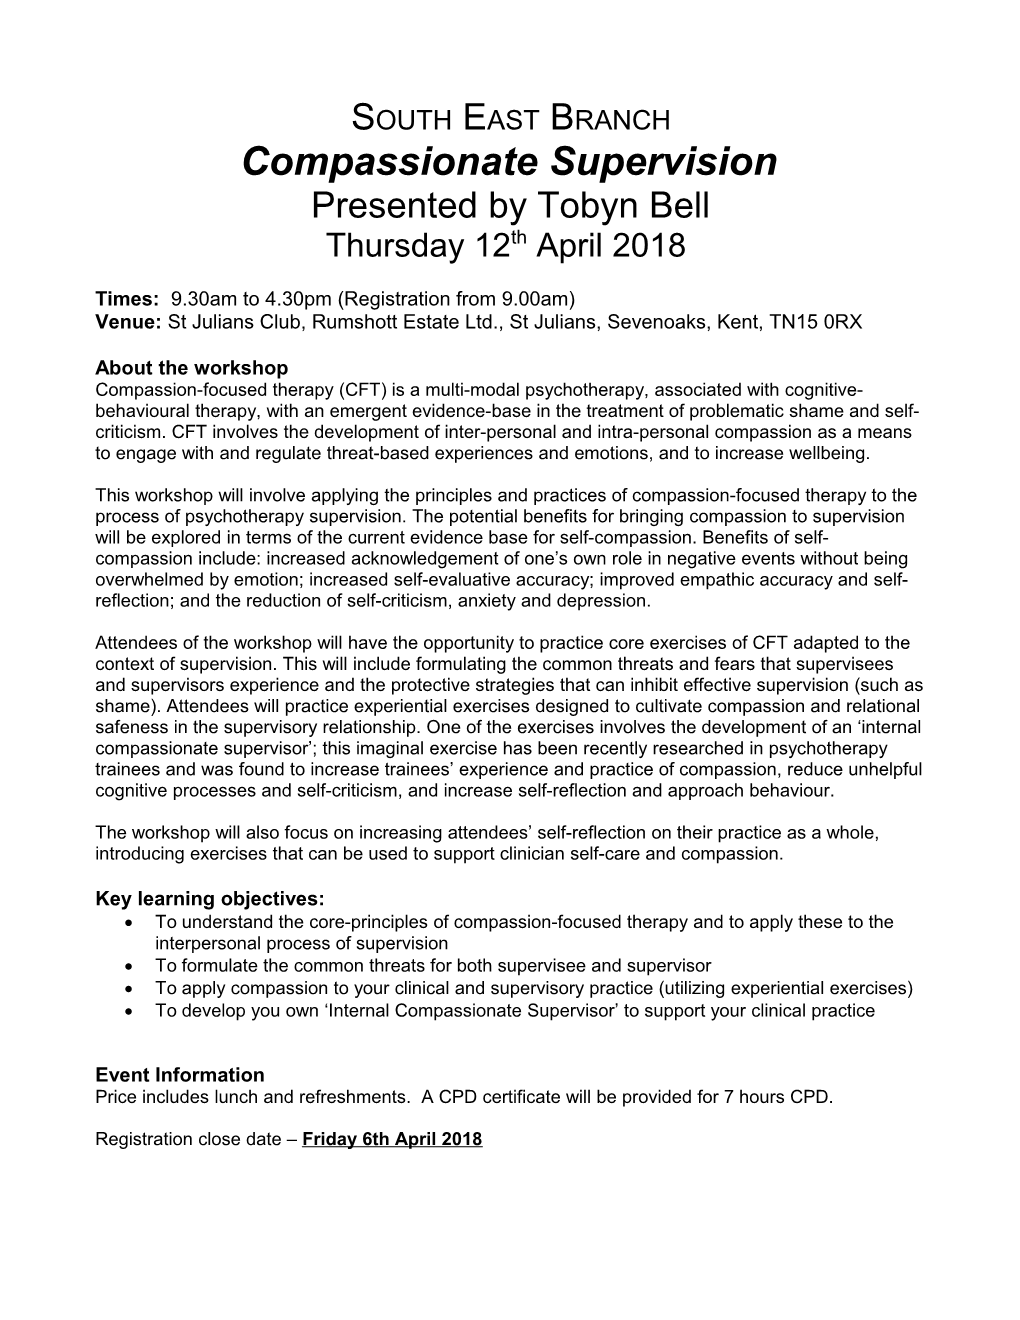 Compassionate Supervision Presented by Tobyn Bell